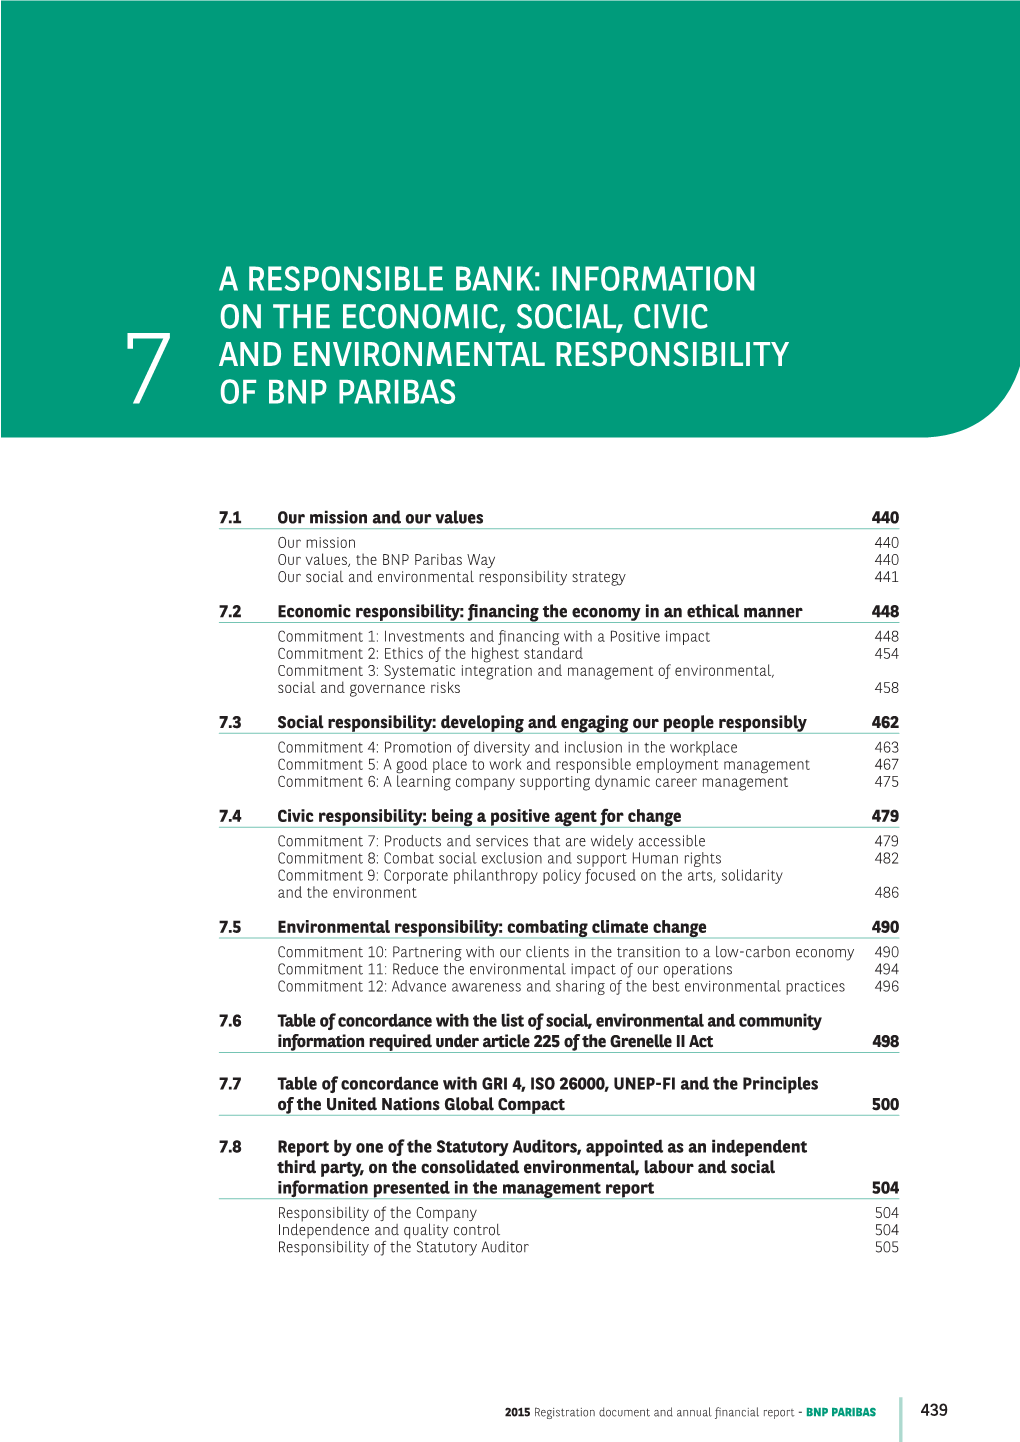 A Responsible Bank: Information on the Economic, Social, Civic and Environmental Responsibility 7 of Bnp Paribas